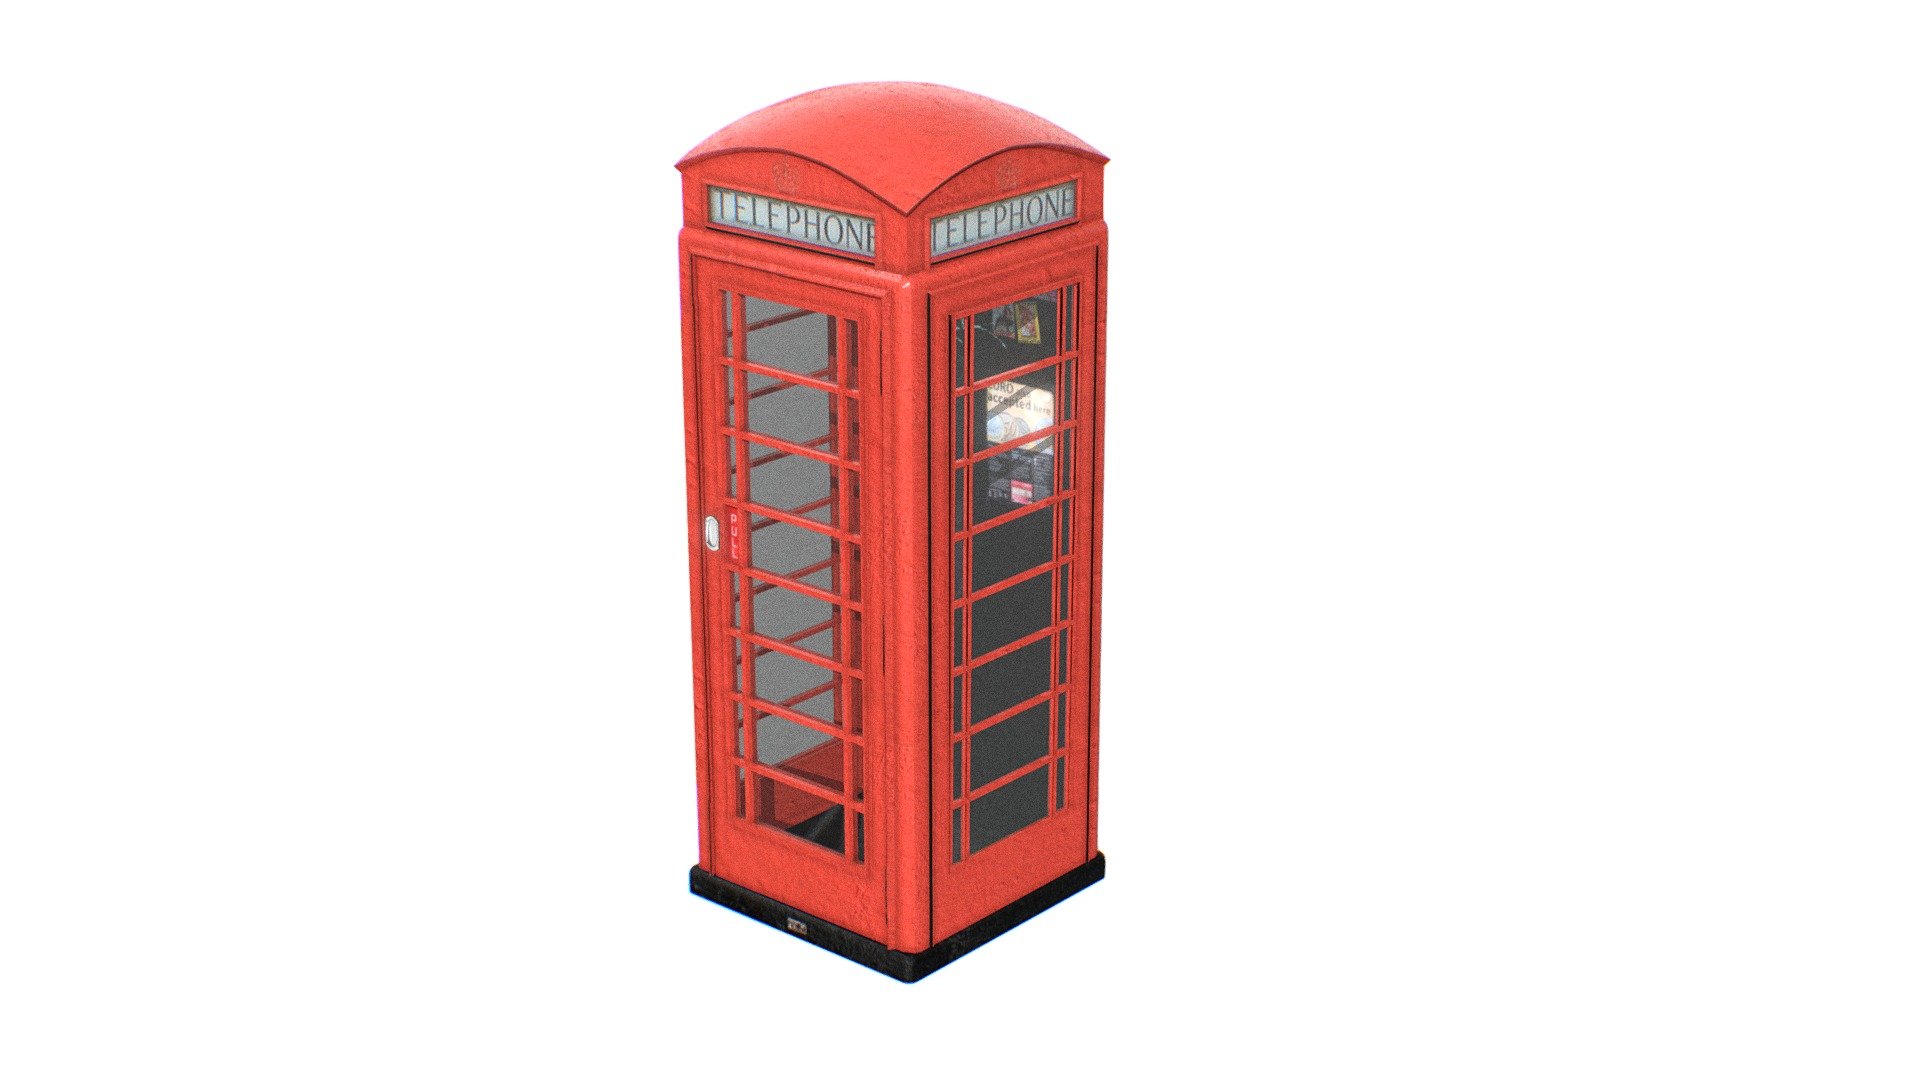 Photorealistic The red telephone box, a public english telephone kiosk.

English K6 telephone booth designed in 1935 has become a British icon 3d model